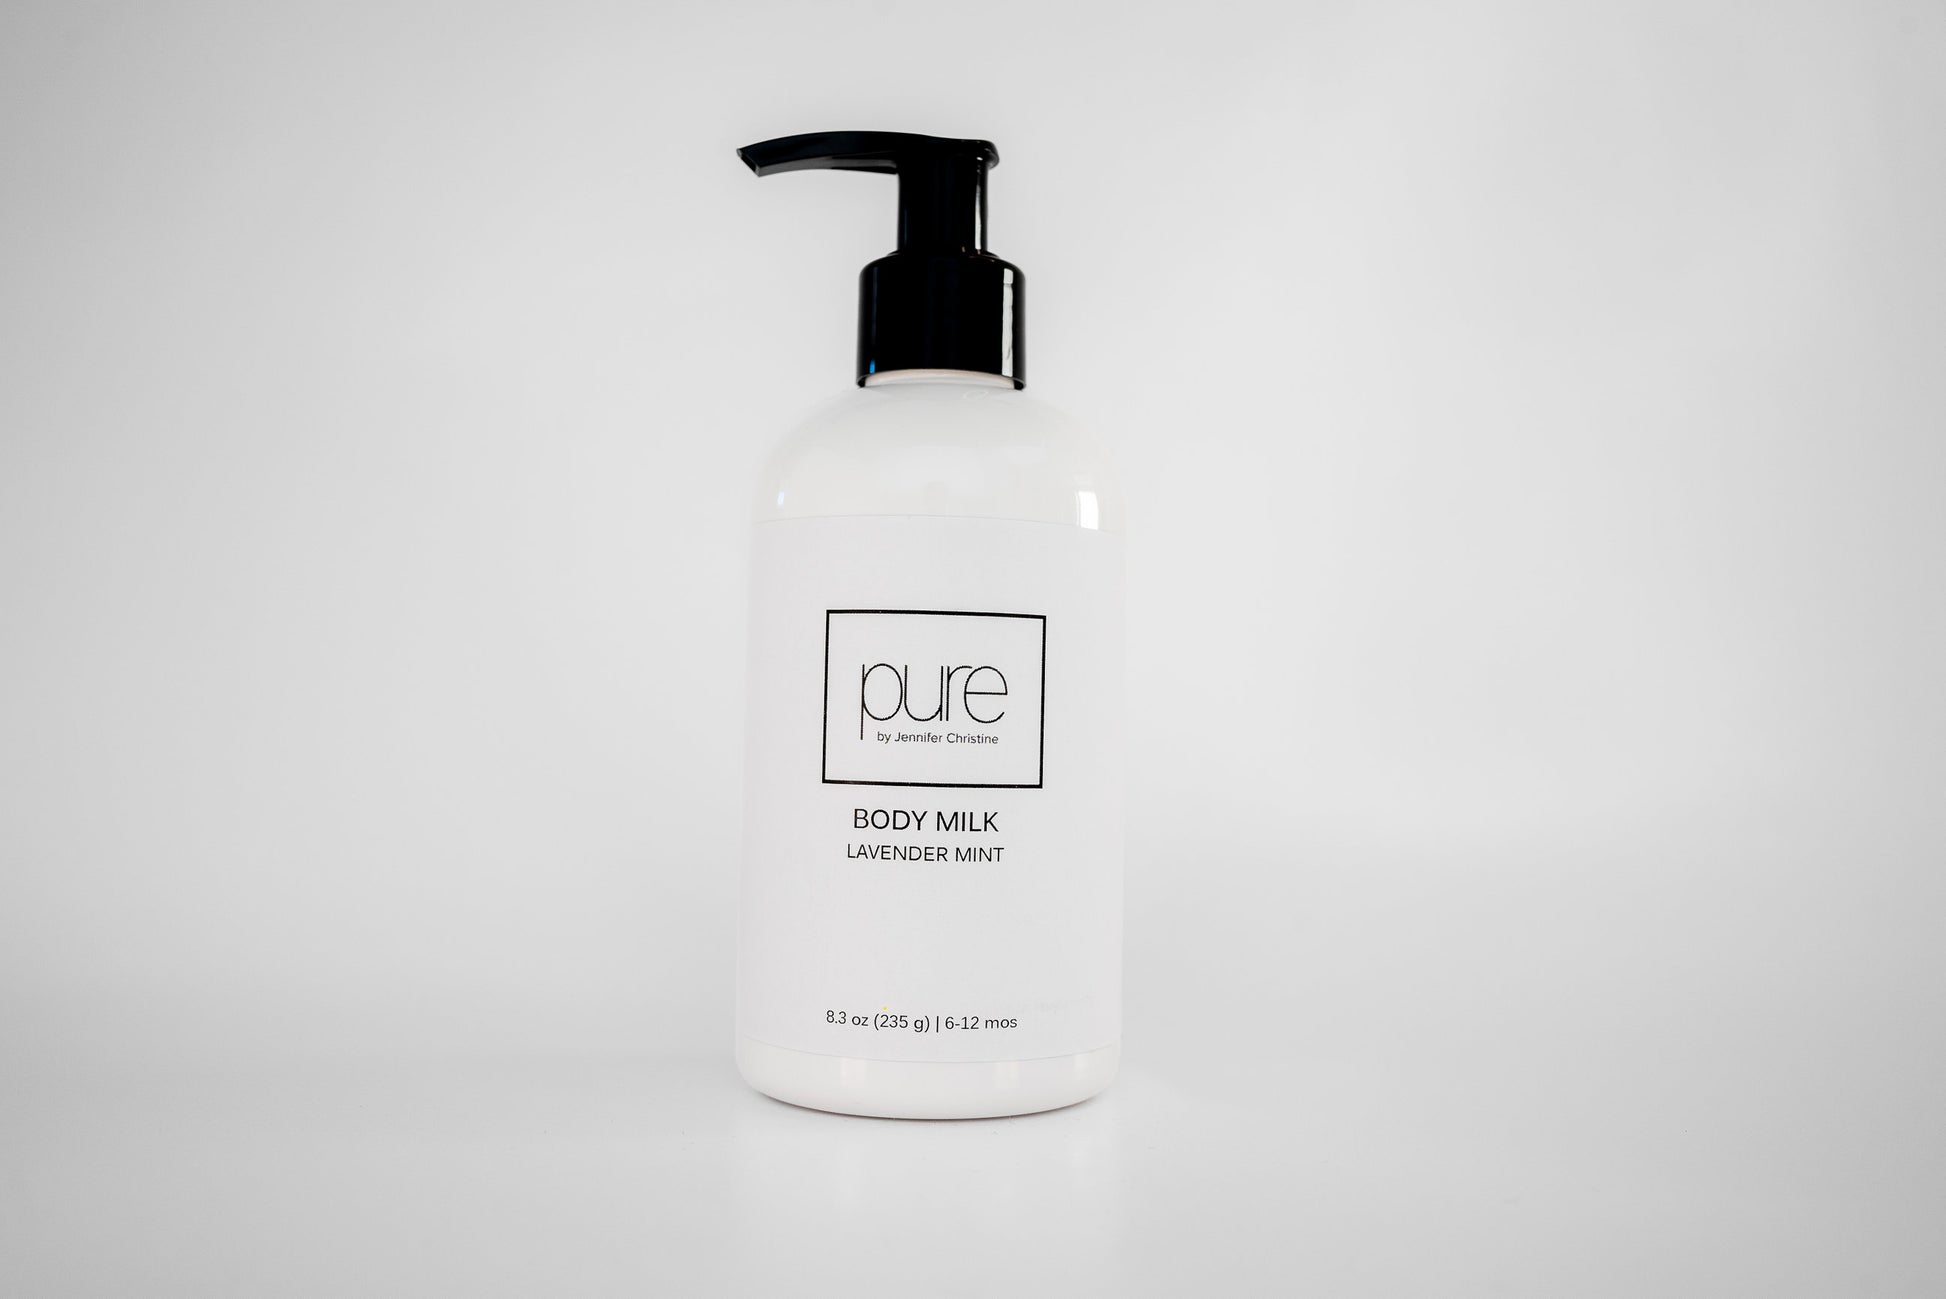 Plant-based lightweight lotion that provides nourishment and hydration for your skin while also promoting healing and restoration due to high properties of natural botanicals.  Choose from 3 scents to find your perfect match.